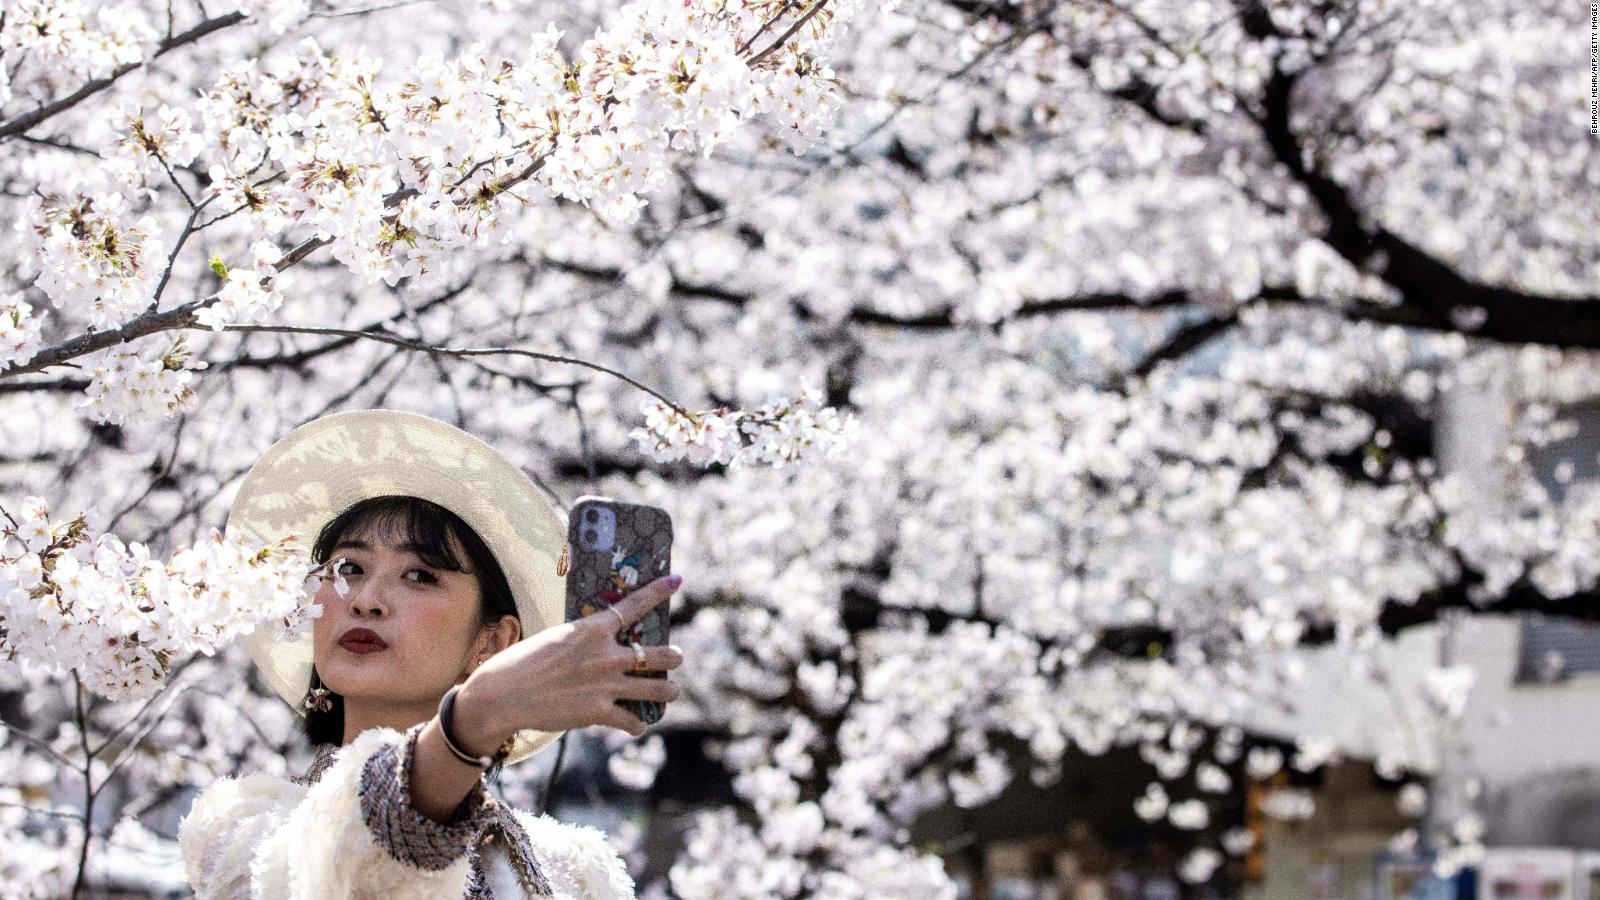 Cherry blossoms in Japan are showing alarming signs, researchers said